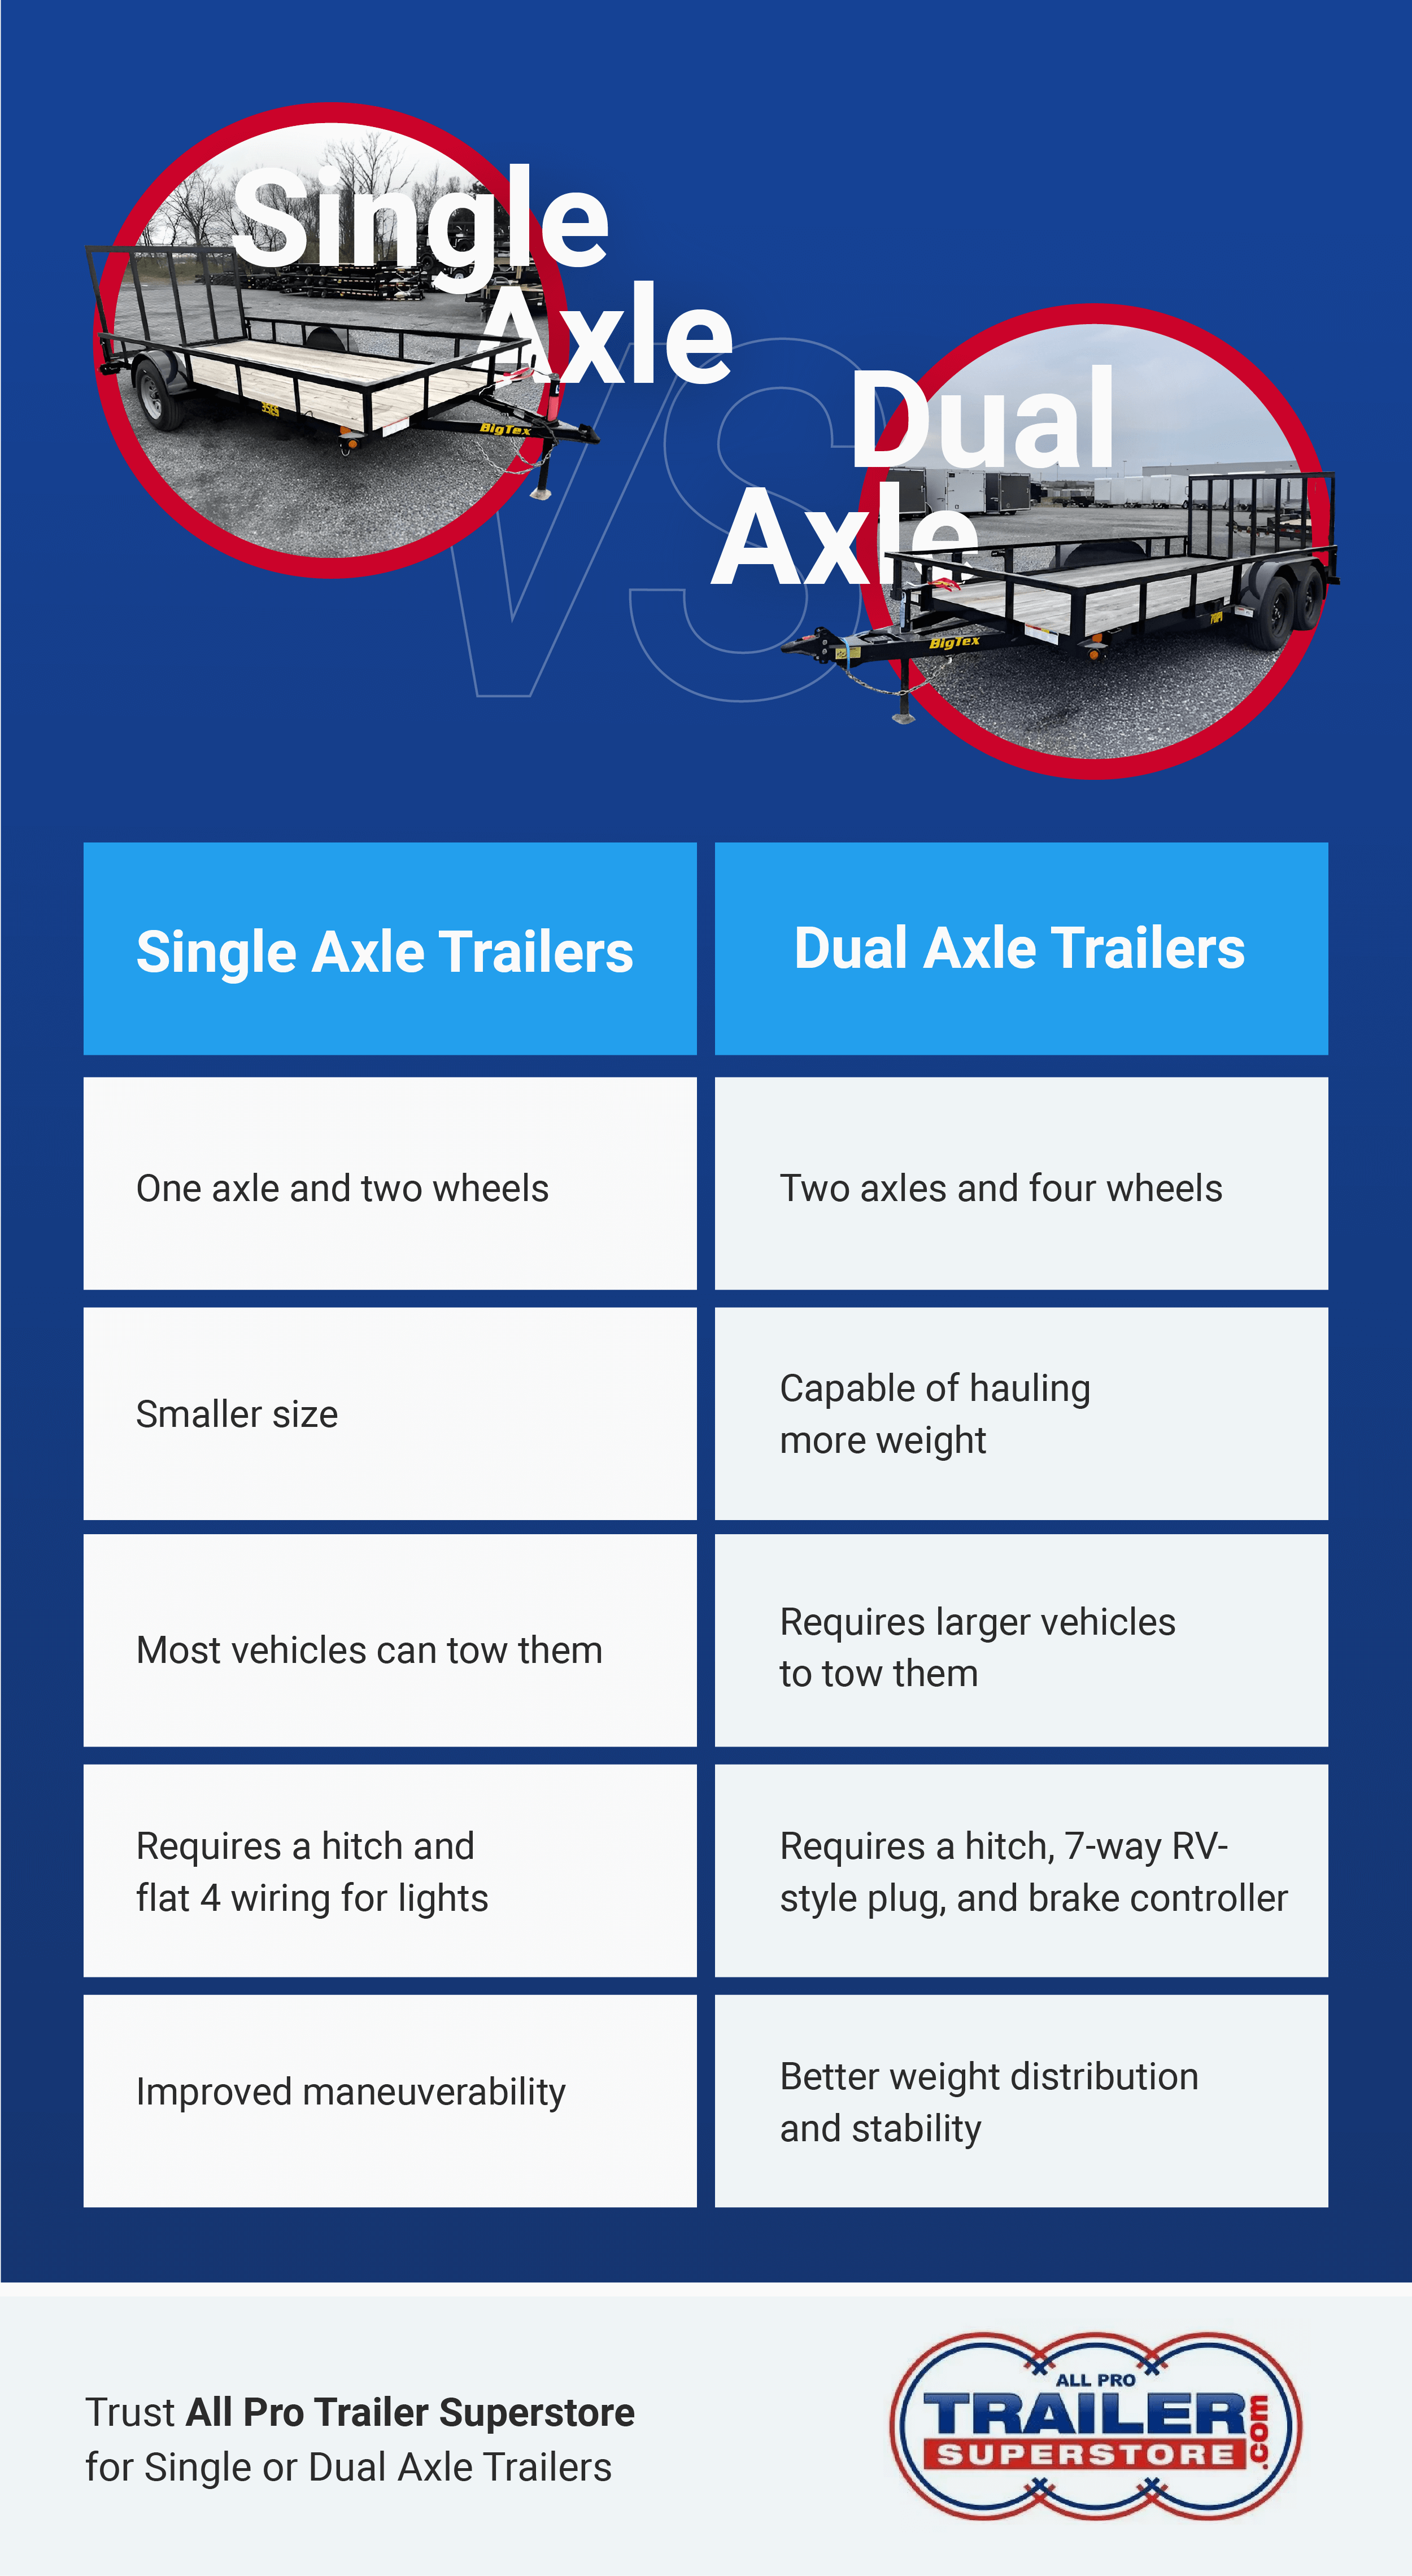 Single vs dual axle trailer comparison, view similarities and differences.